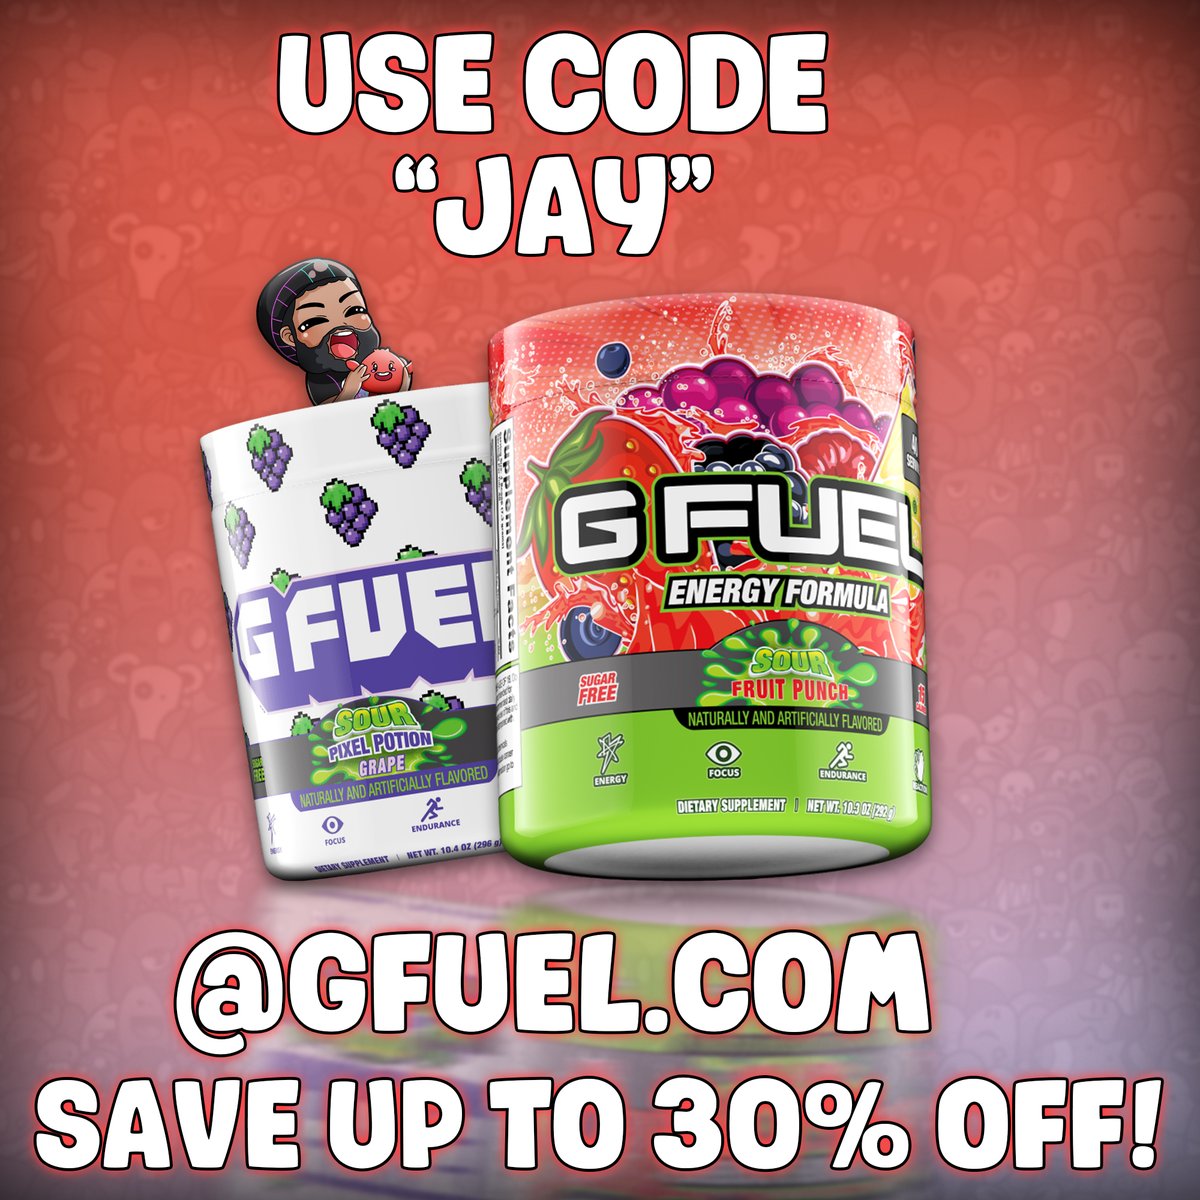 🍓UNLEASH THE #GFUEL SOUR🍇

We got 2 amazing Sour Flavors from @GFuelEnergy dropping today!👀

Sour Fruit Punch & Pixel Potion are here to knock your tastebuds into a sour, yet energizing trance!😱

Make sure you guys use code 'JAY' to save 30% off on the #GFUELSour flavors!🤝